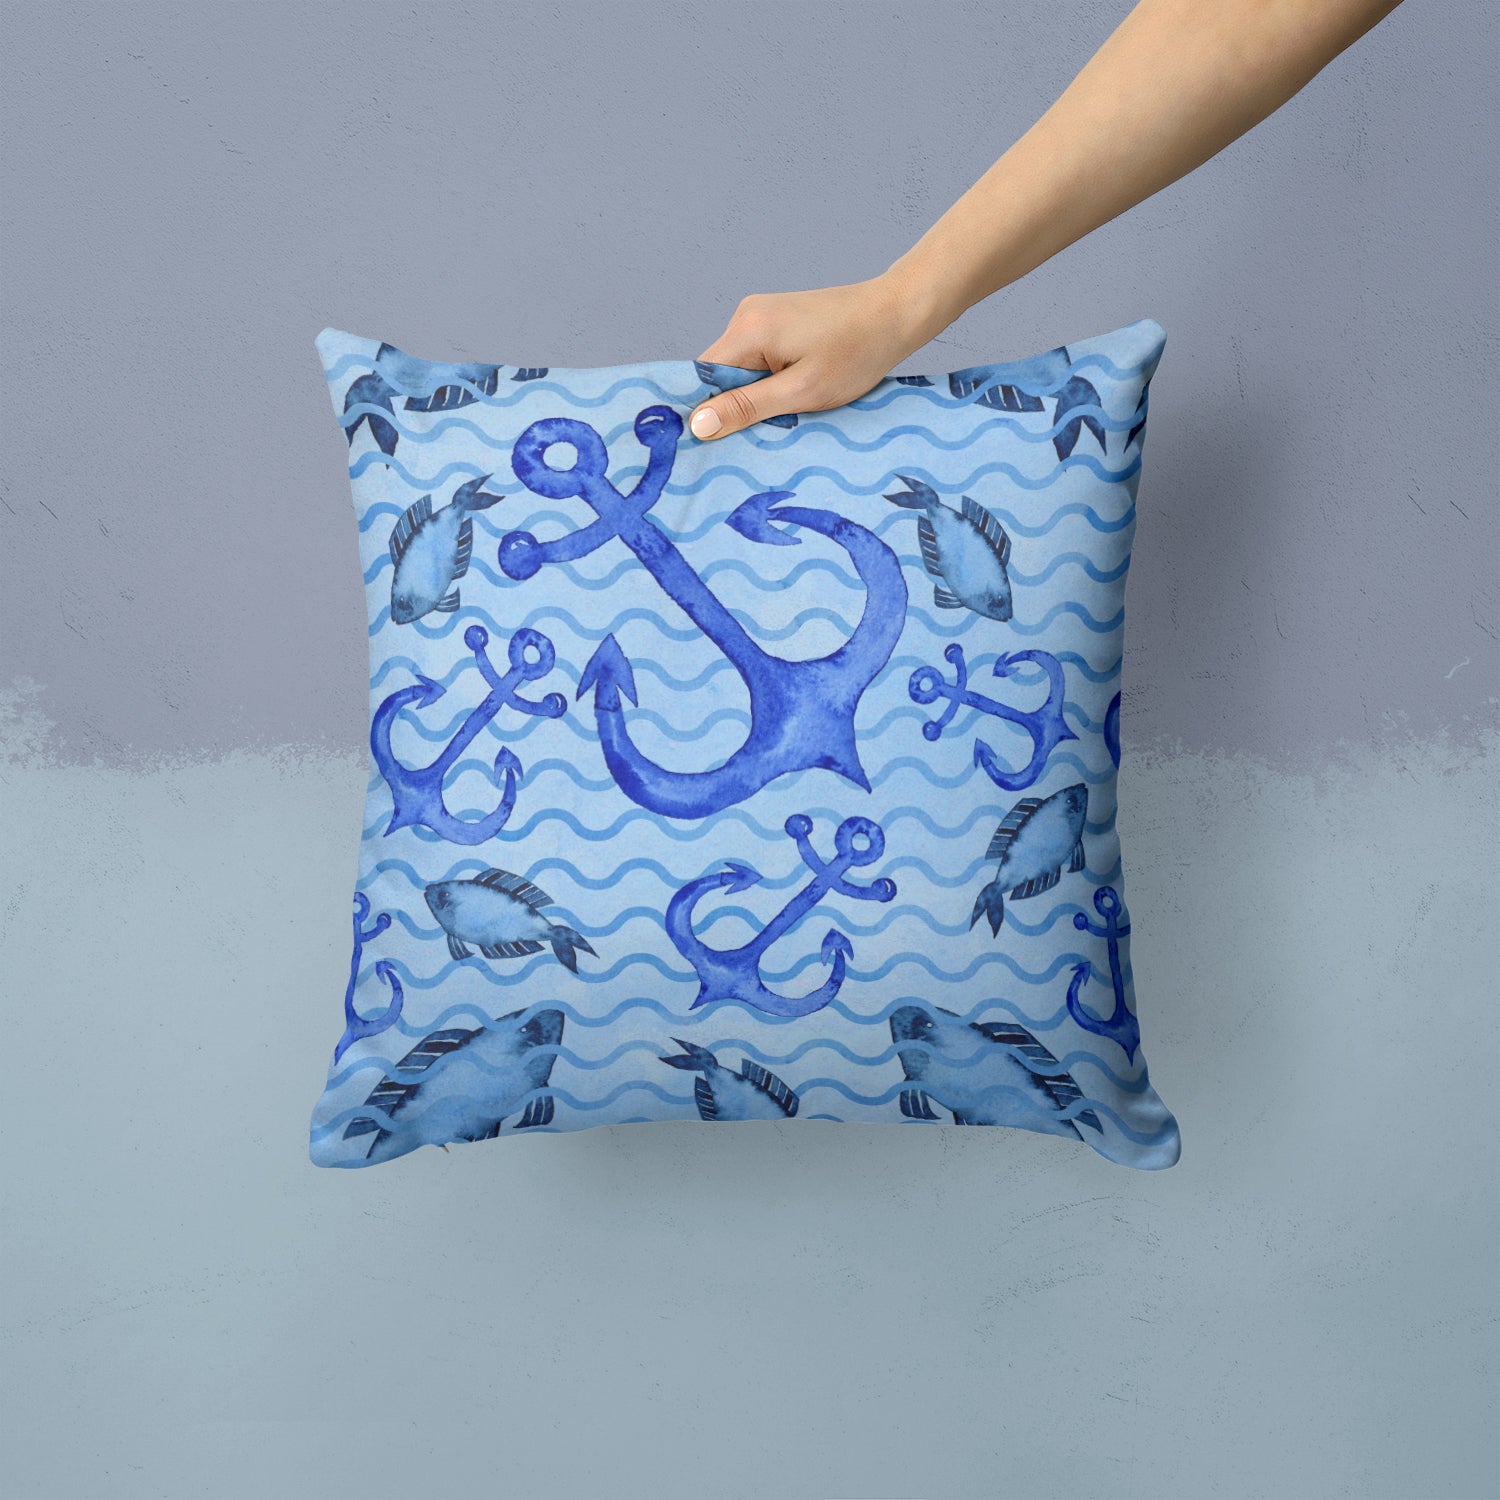 Beach Watercolor Anchors and Fish Fabric Decorative Pillow BB7534PW1414 - the-store.com